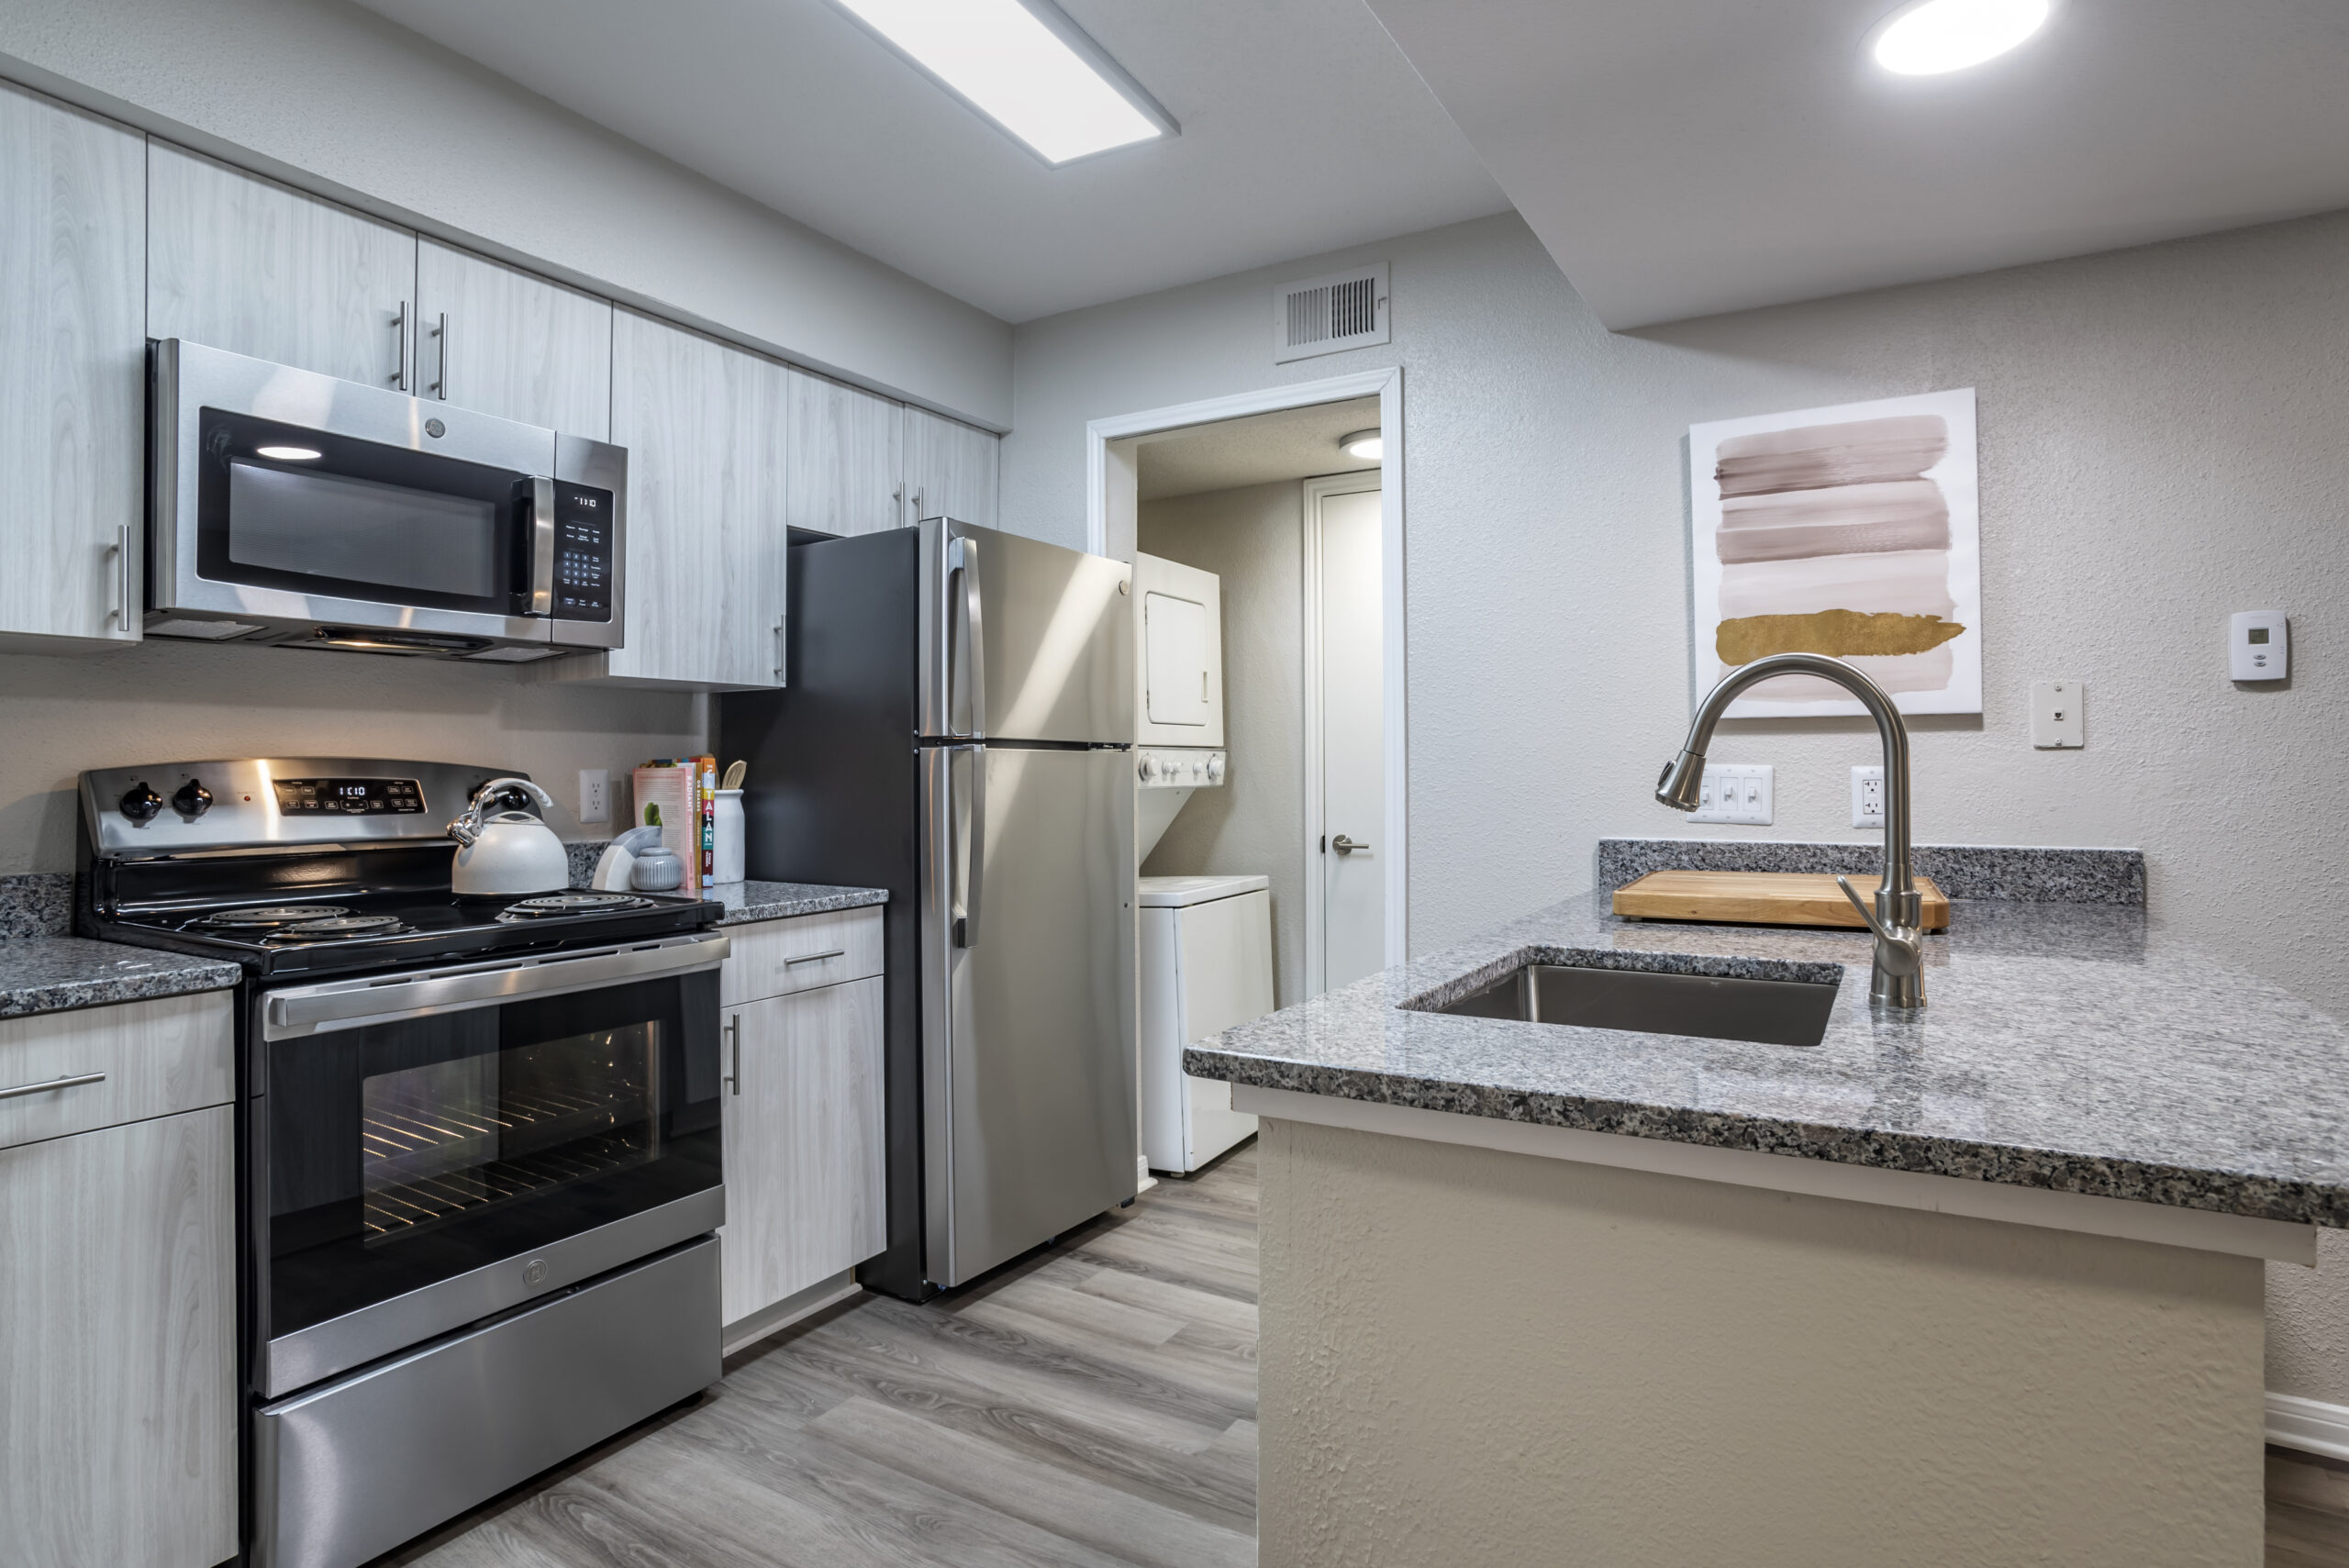 Image of designed kitchen space at assembly Herndon